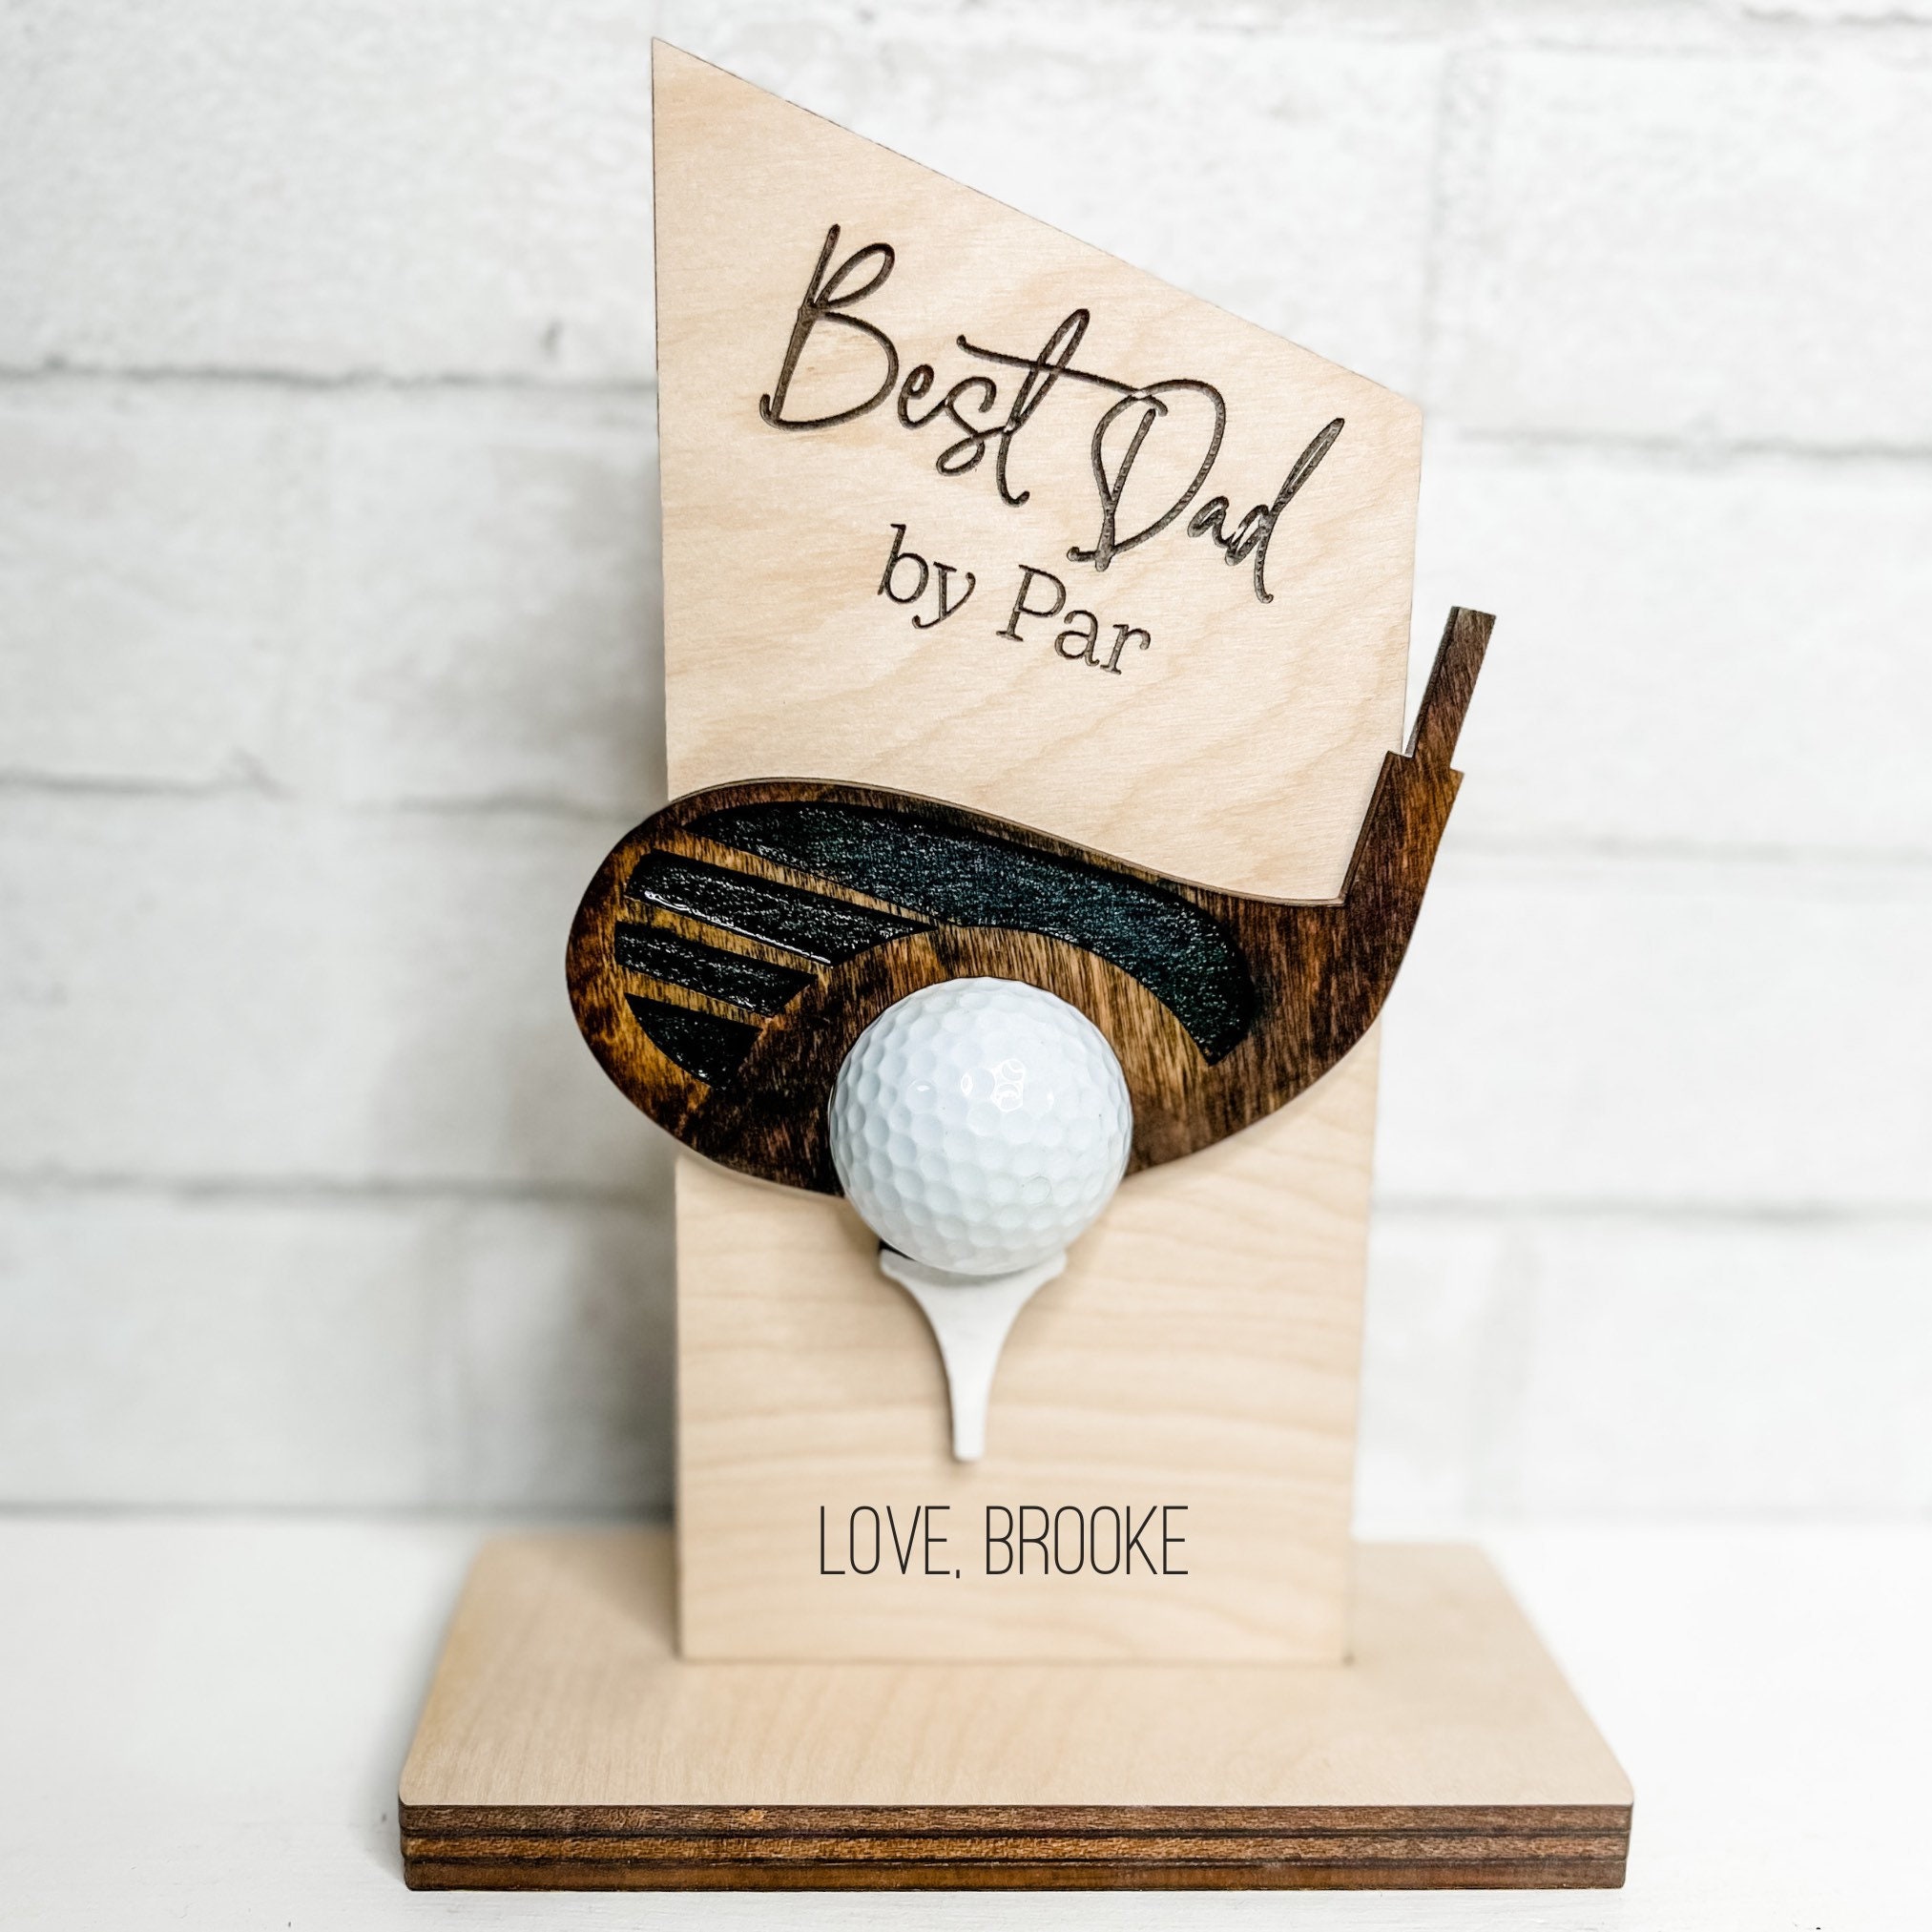 Best affordable Father's Day golf gifts: Golf gifts for less than $100